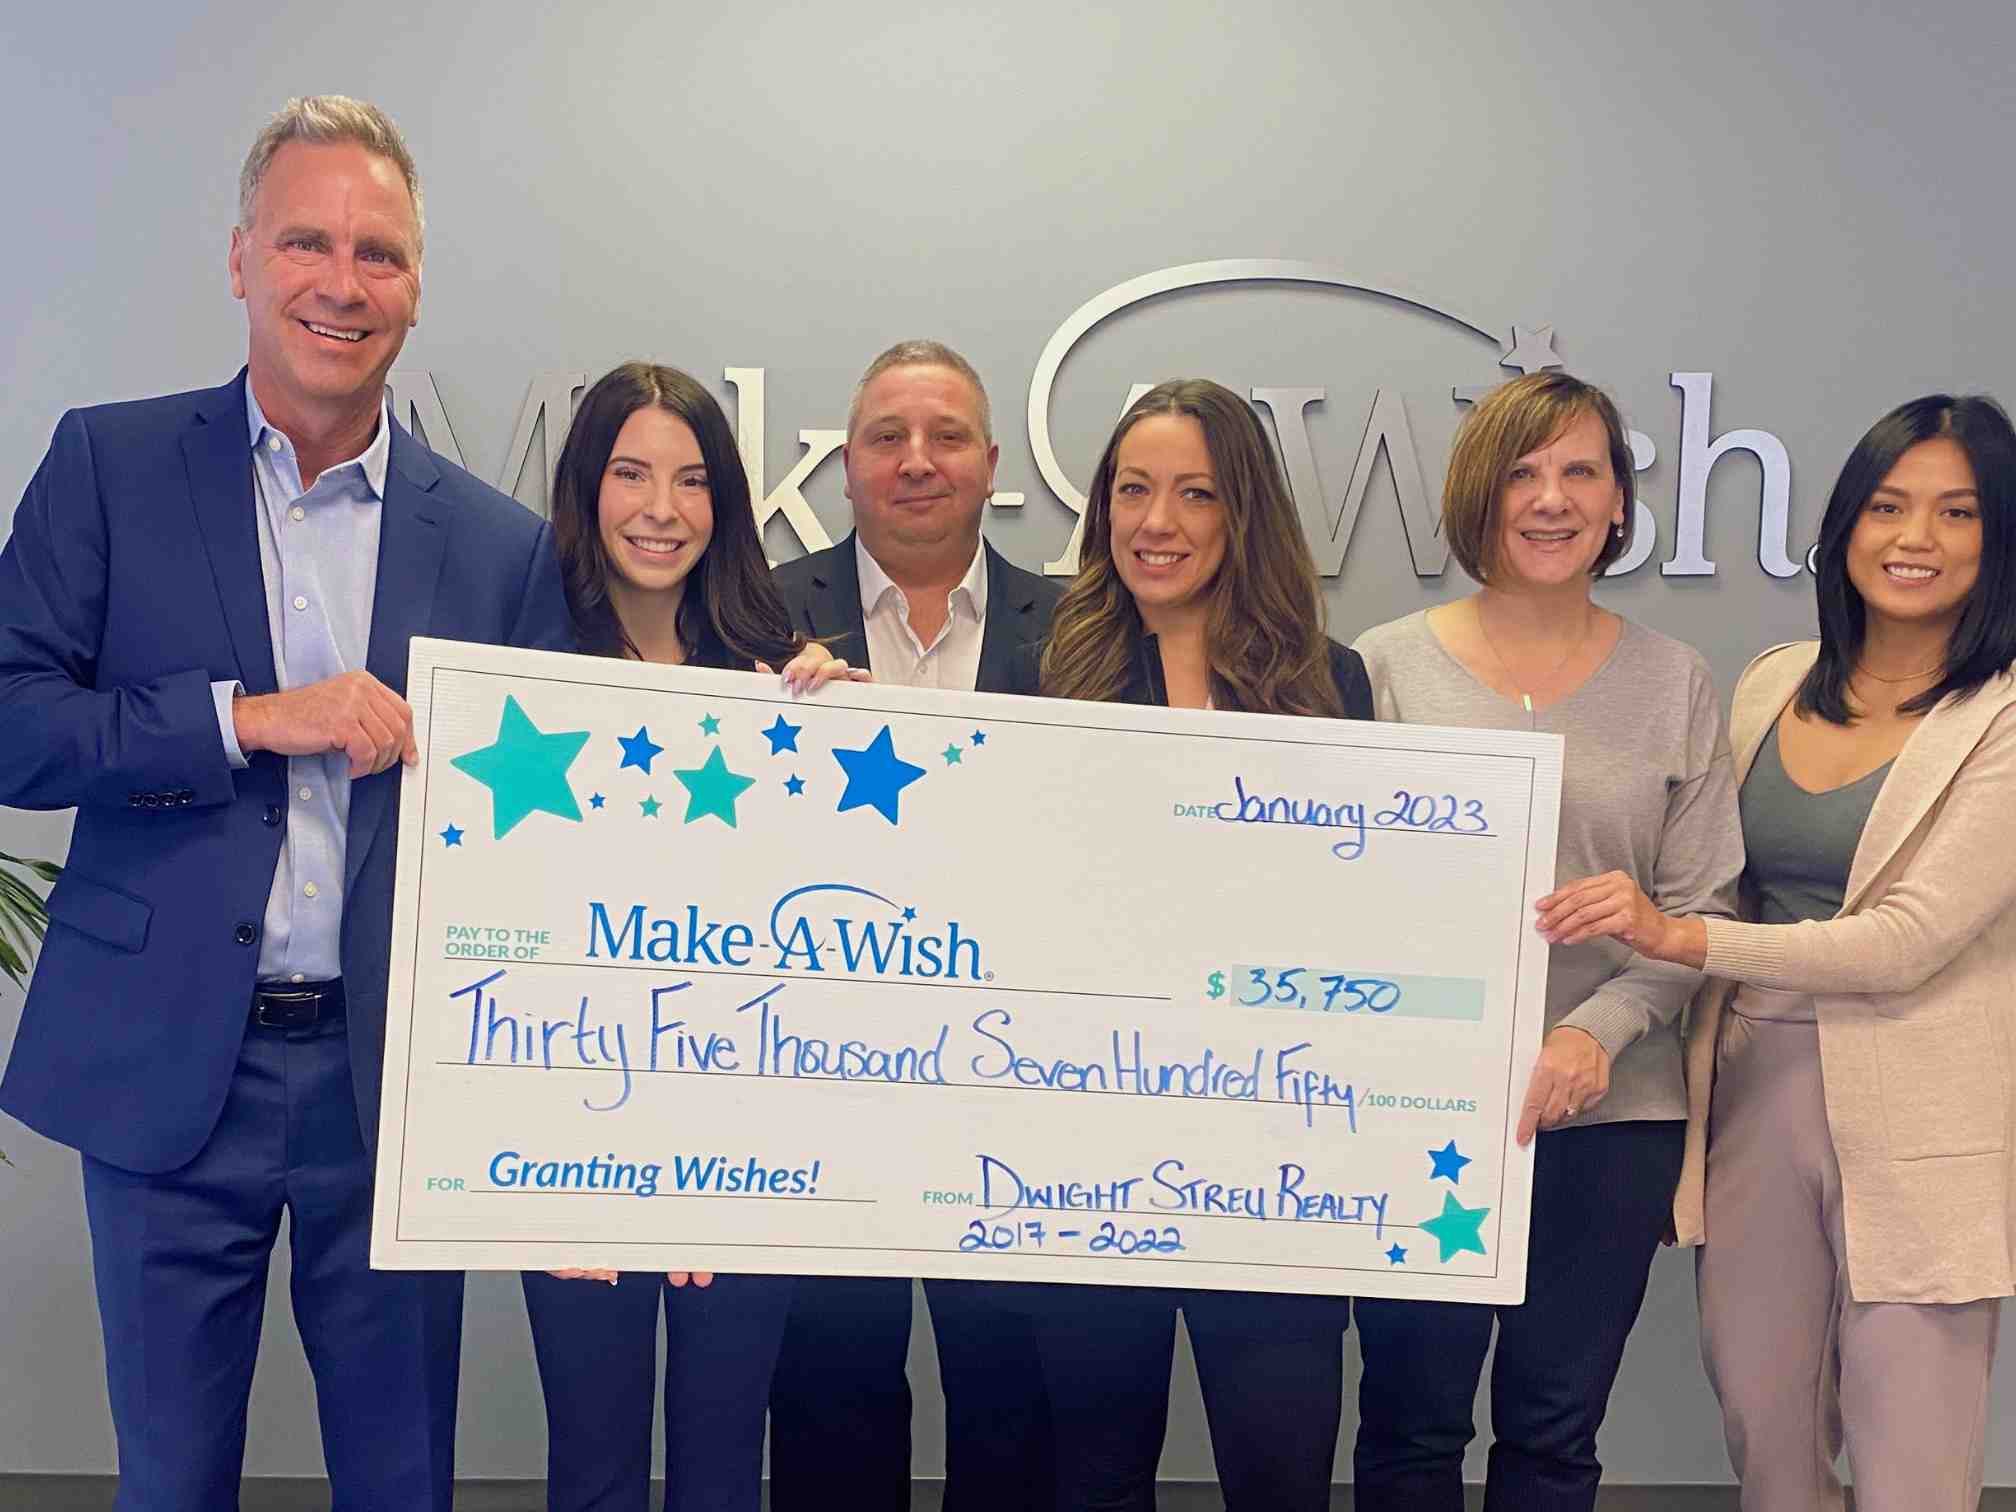 Dwight Streu Real Estate Team gives back to Make-A-Wish Canada 